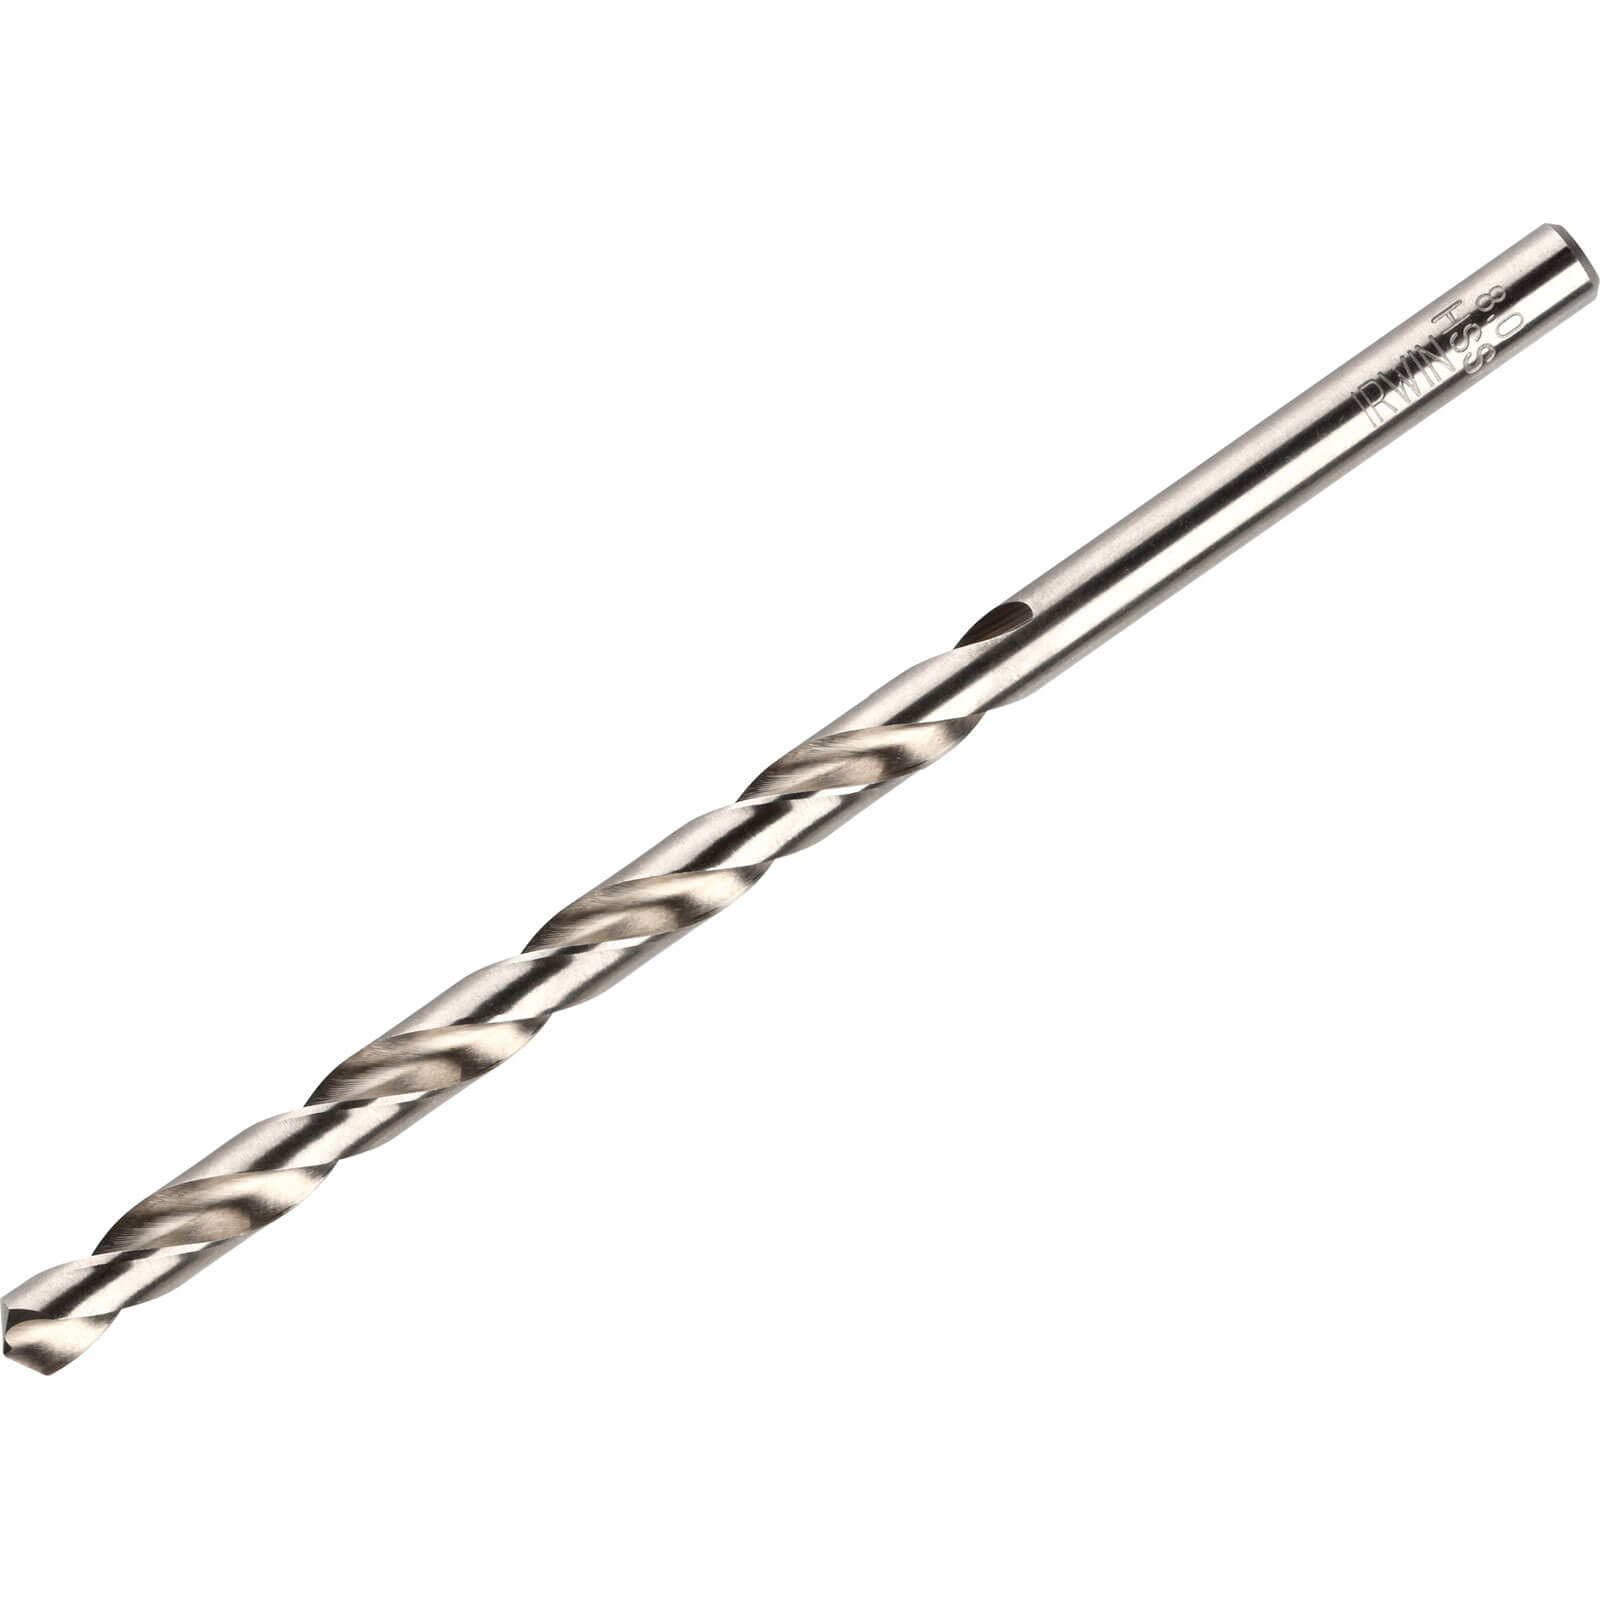 Photo of Irwin Hss Long Pro Drill Bits 2mm Pack Of 10